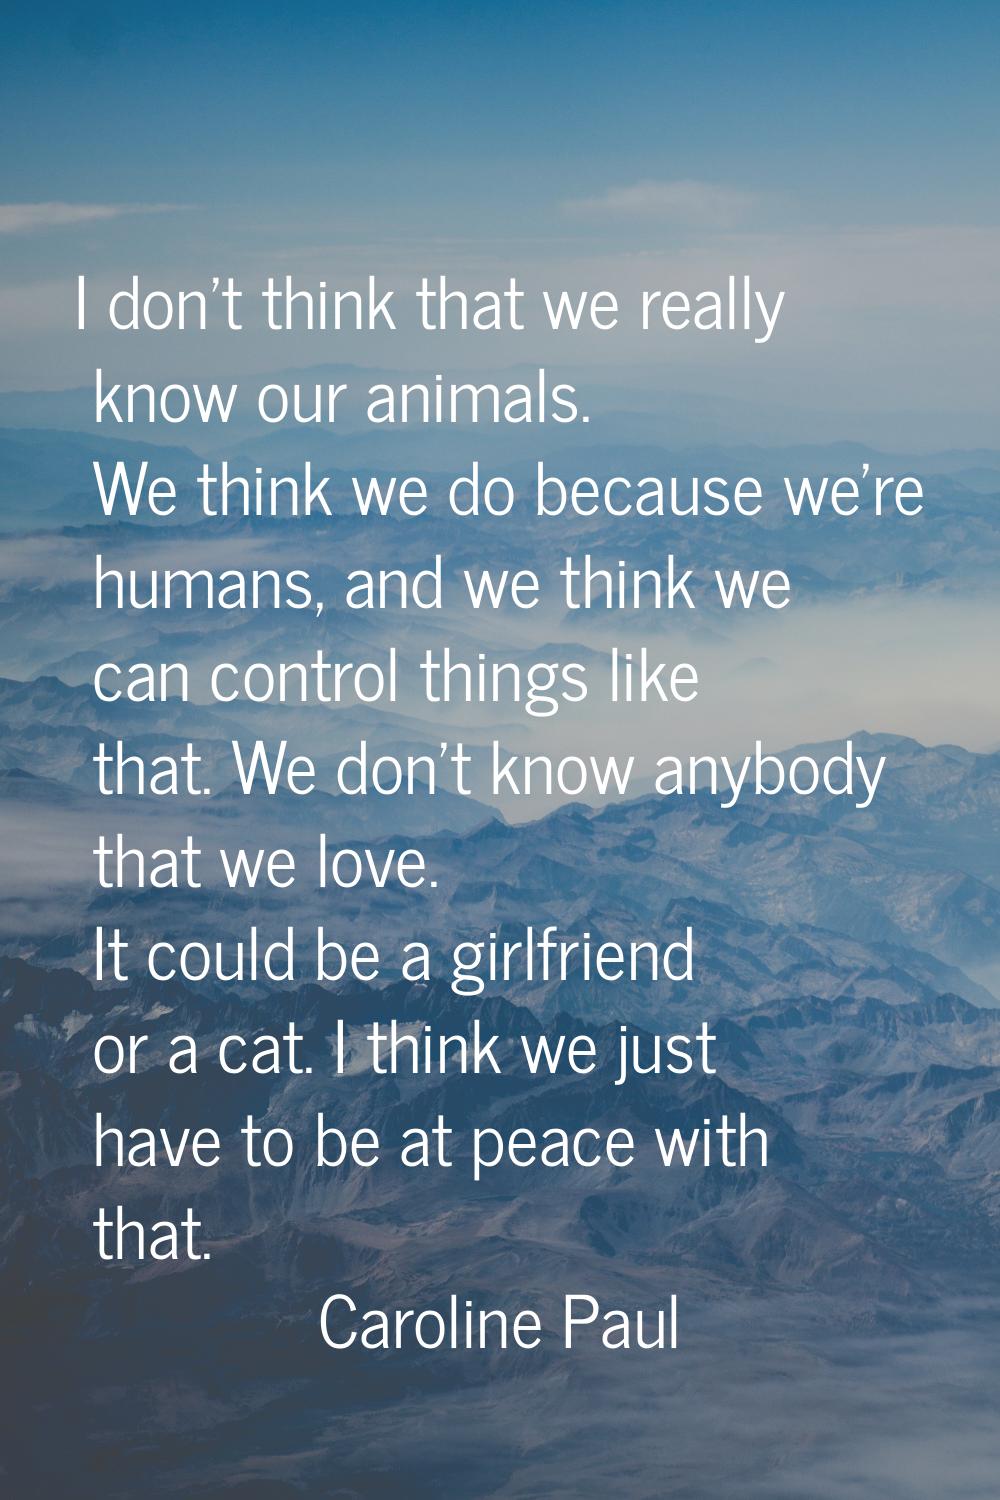 I don't think that we really know our animals. We think we do because we're humans, and we think we